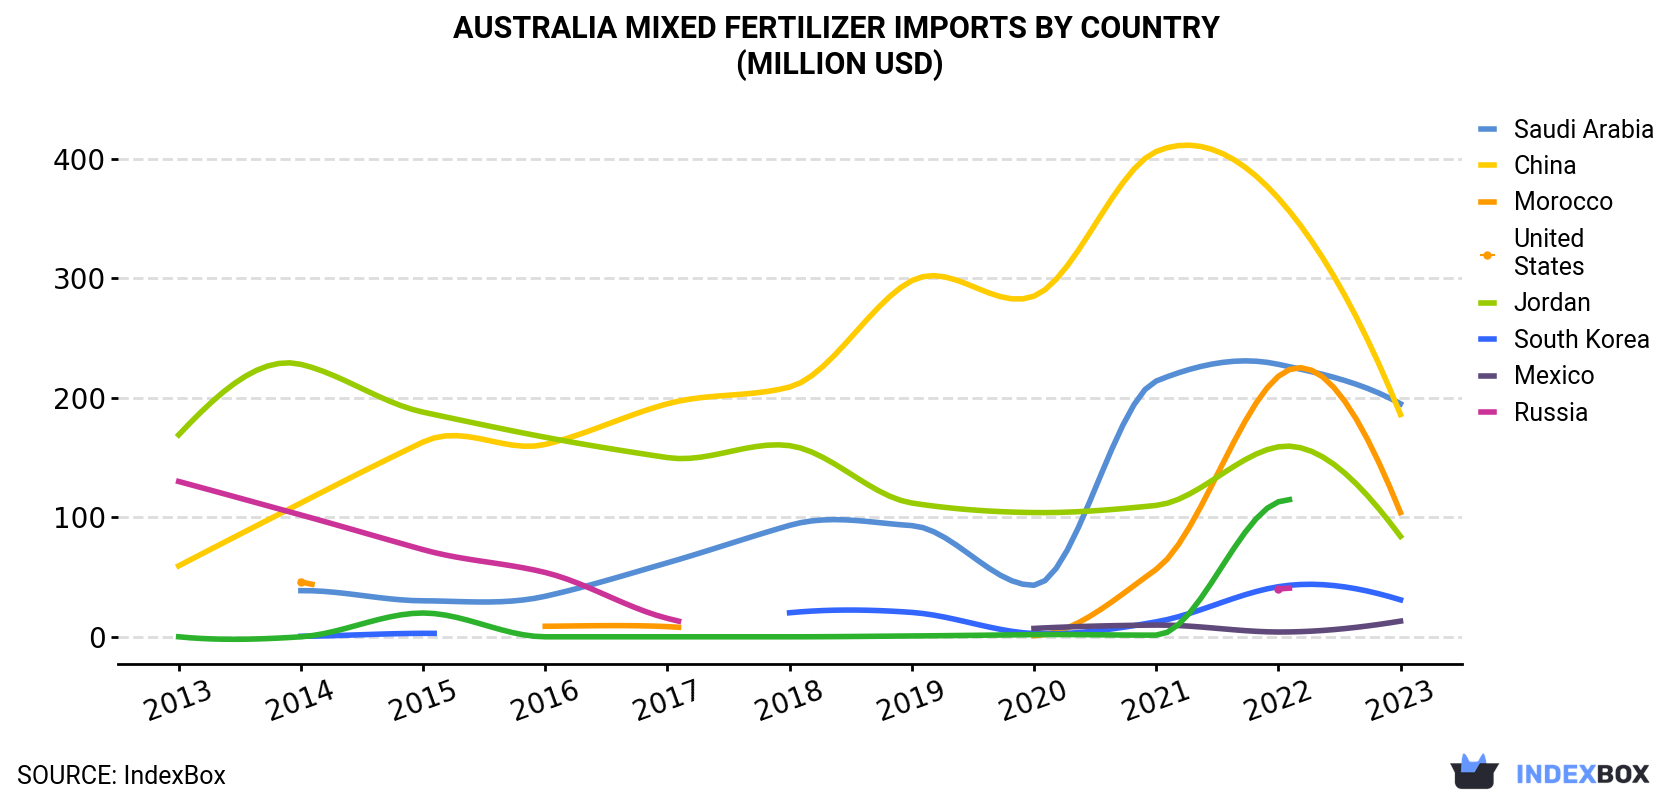 Australia Mixed Fertilizer Imports By Country (Million USD)